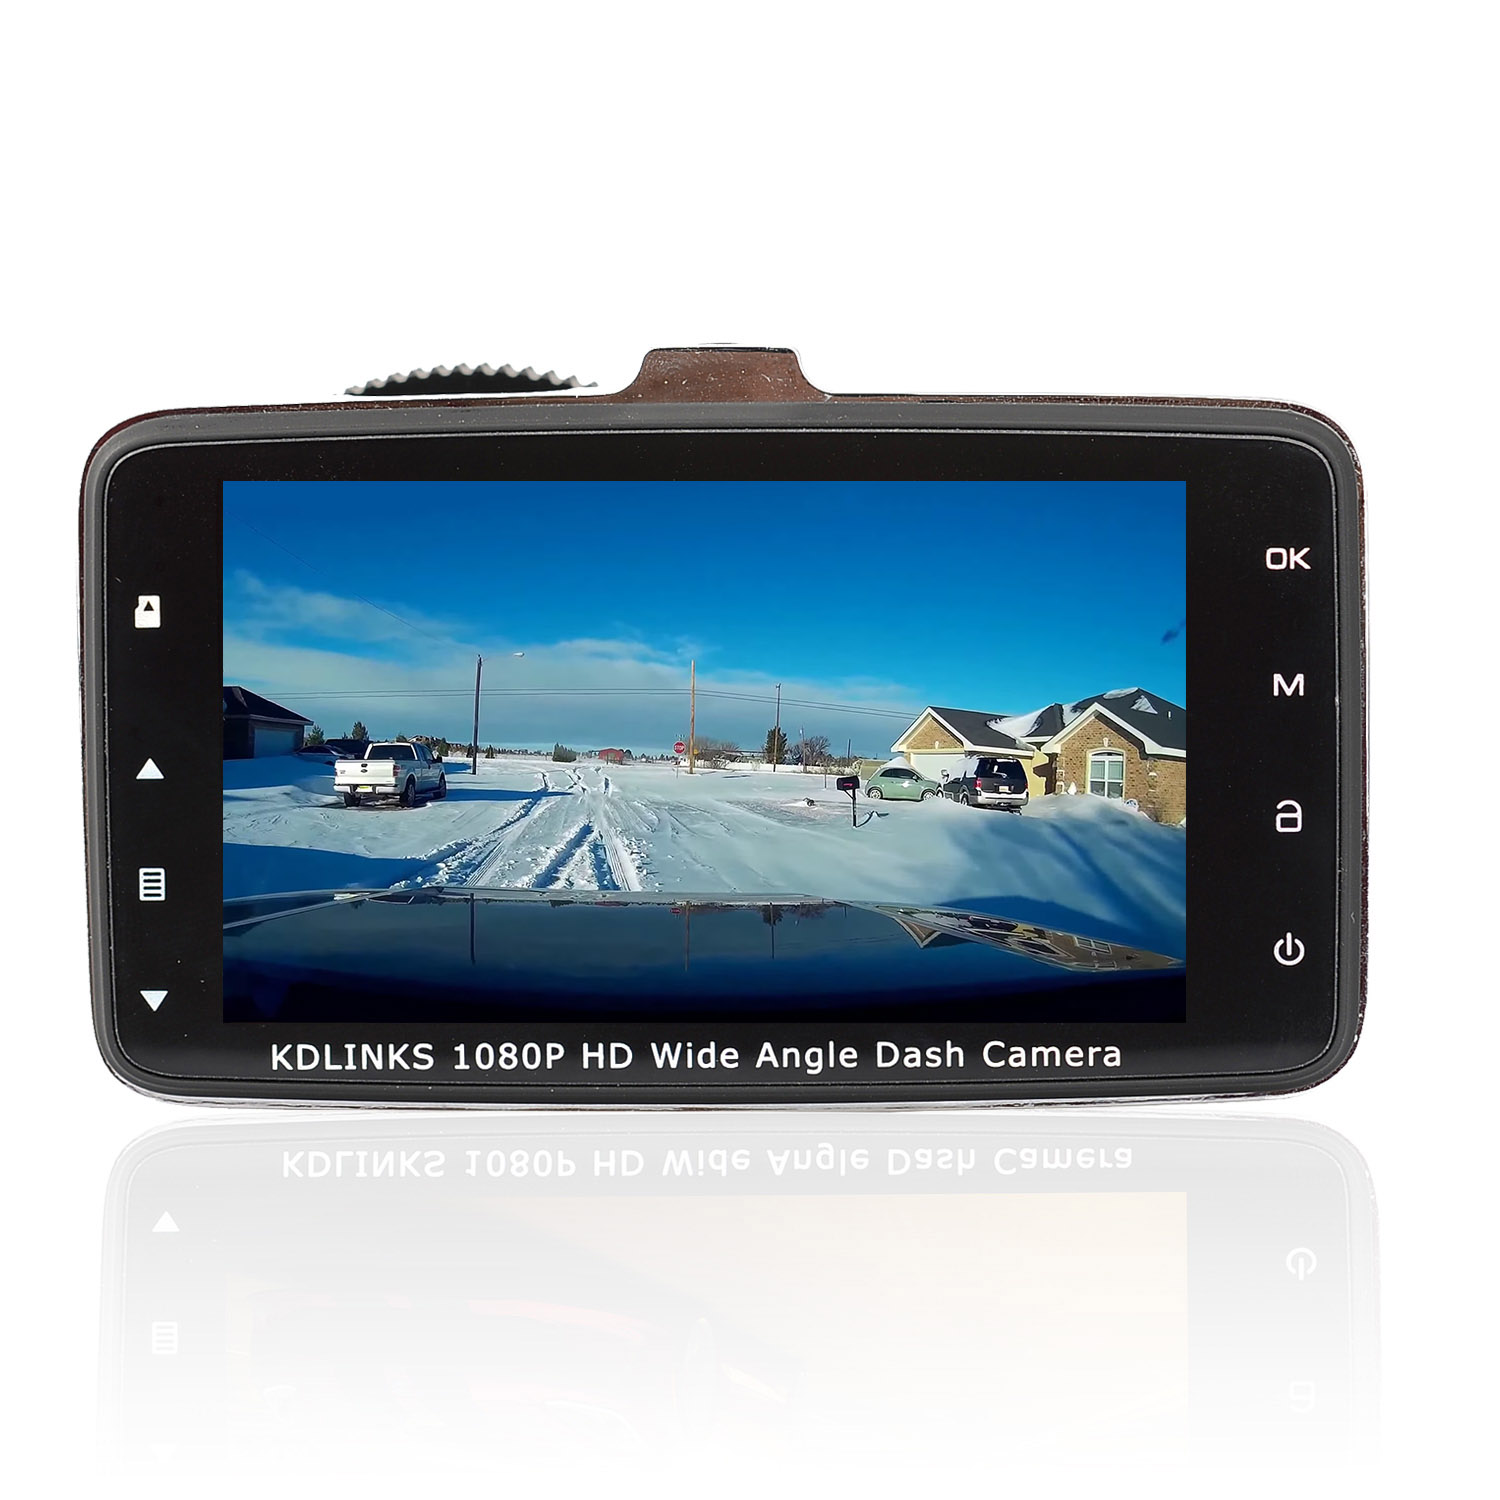 KDLINKS DX2 Full-HD 1080P Front + 720P Rear 290 Degree Super Wide Angle Car Dash Cam with G-Sensor & WDR Superior Night Mode - image 2 of 6